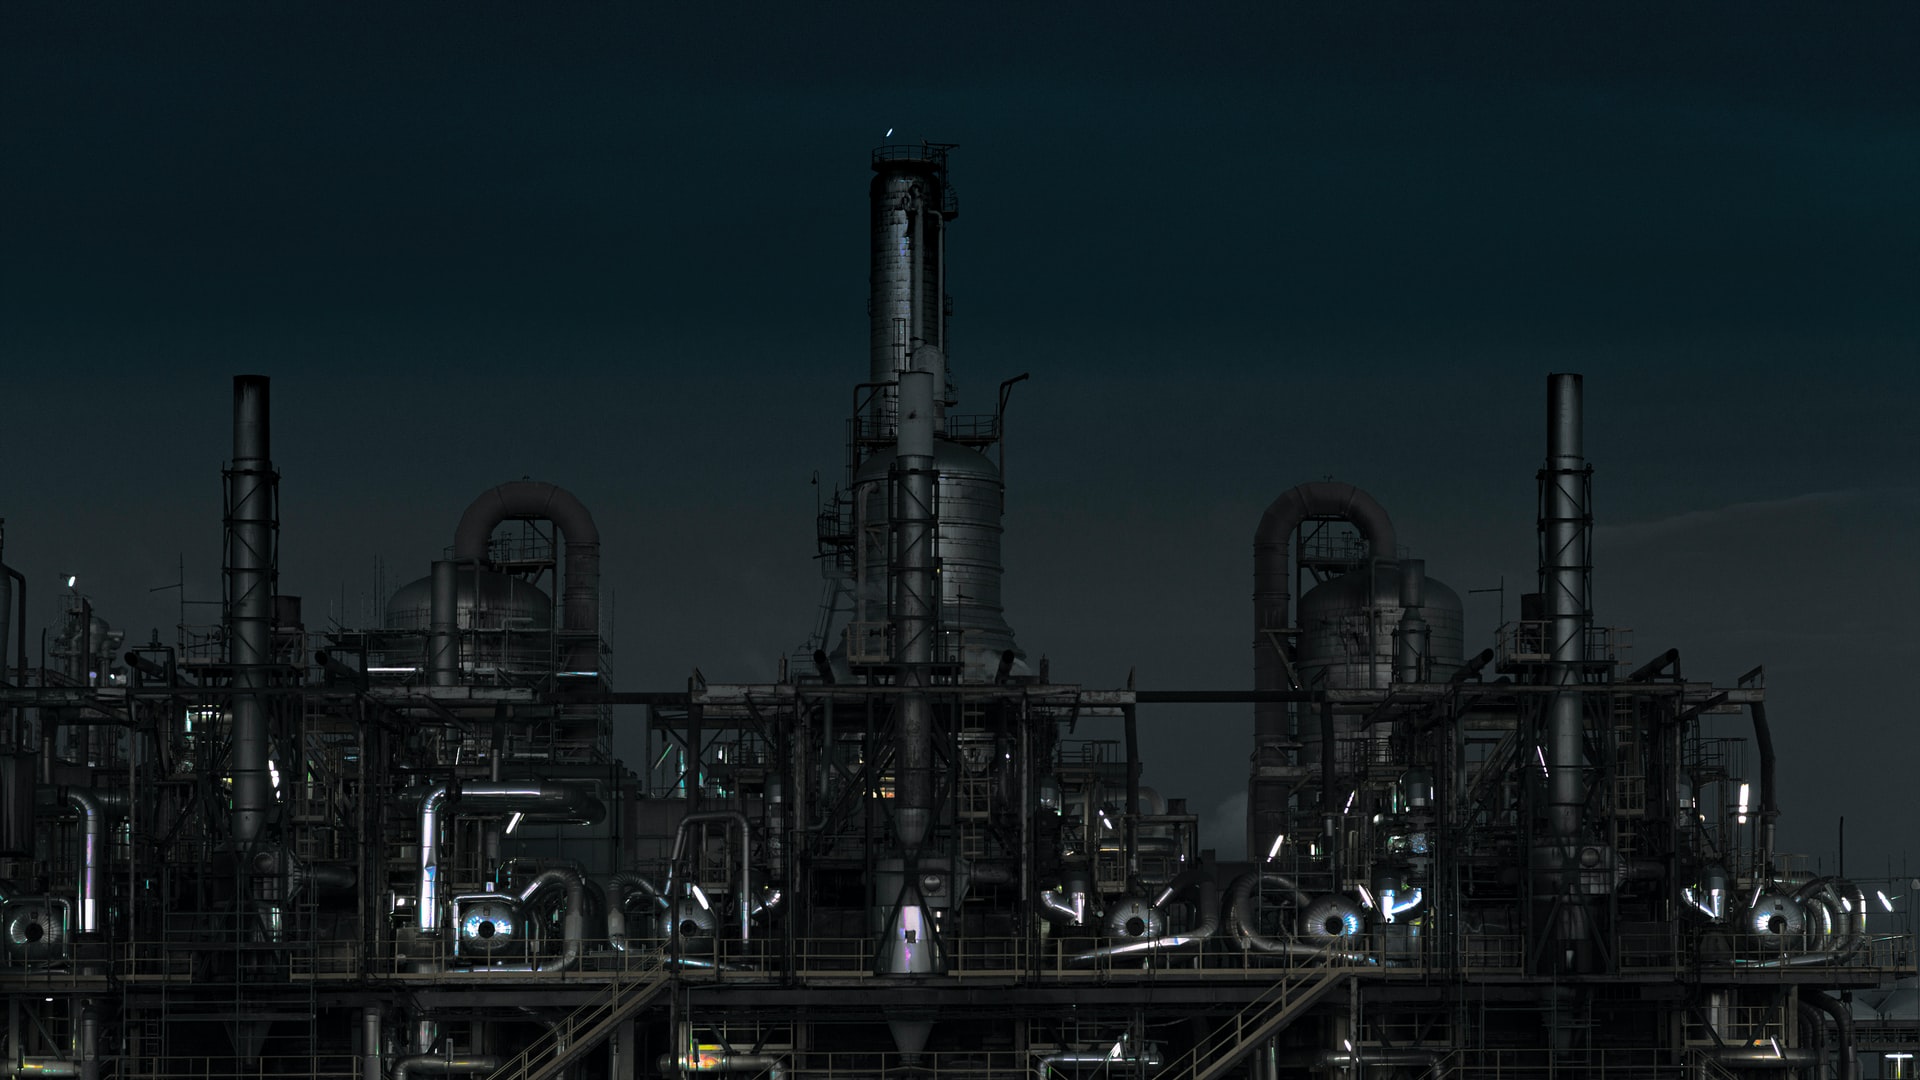 Expect Oil Refiners to Lag When Energy Market Rebounds